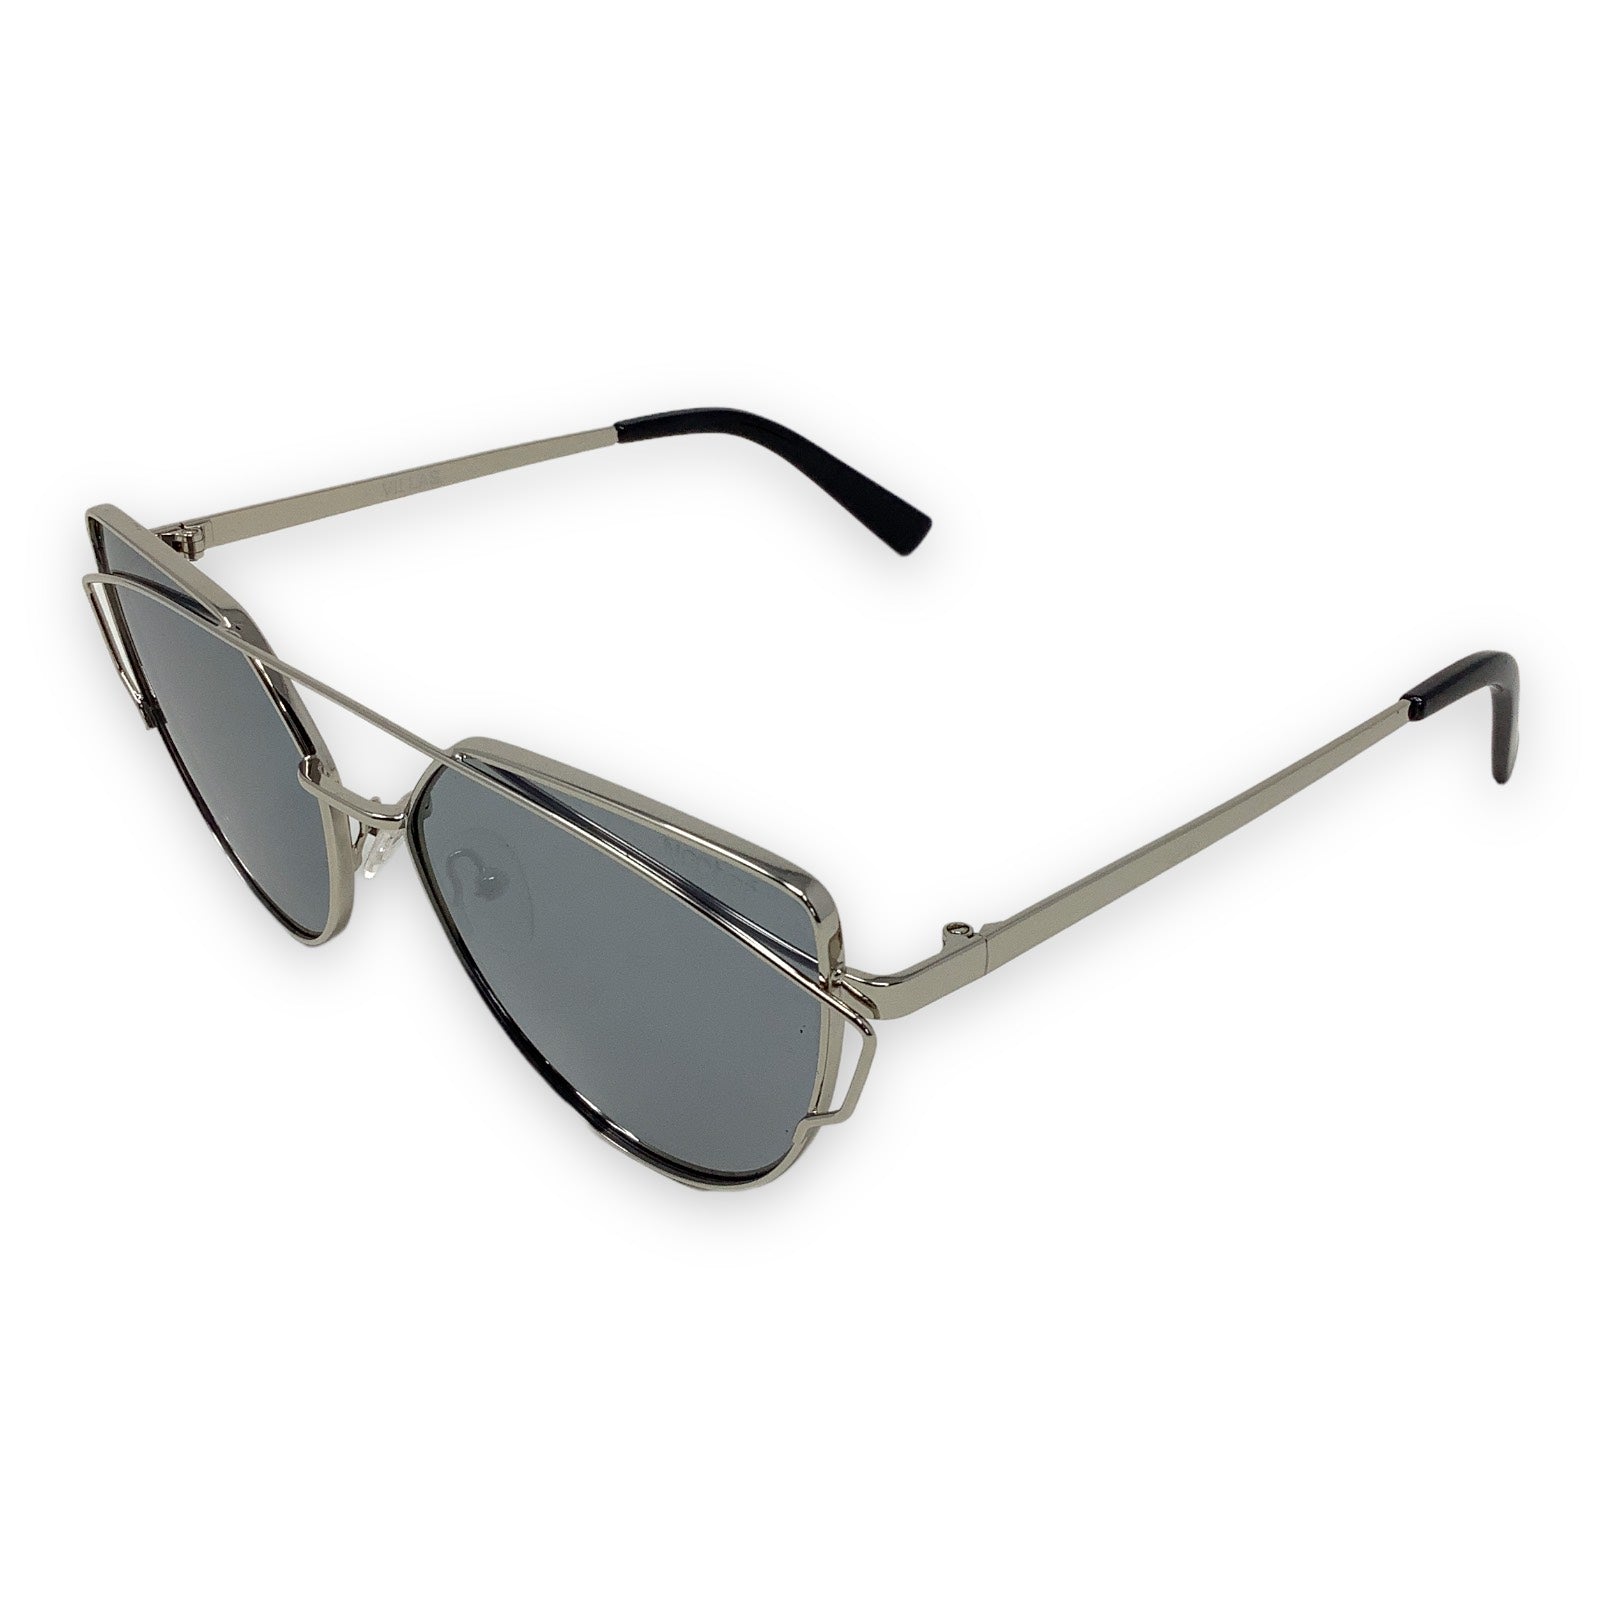 Villas Polarized Sunglasses | Silver Frame with Silver Tinted Lens